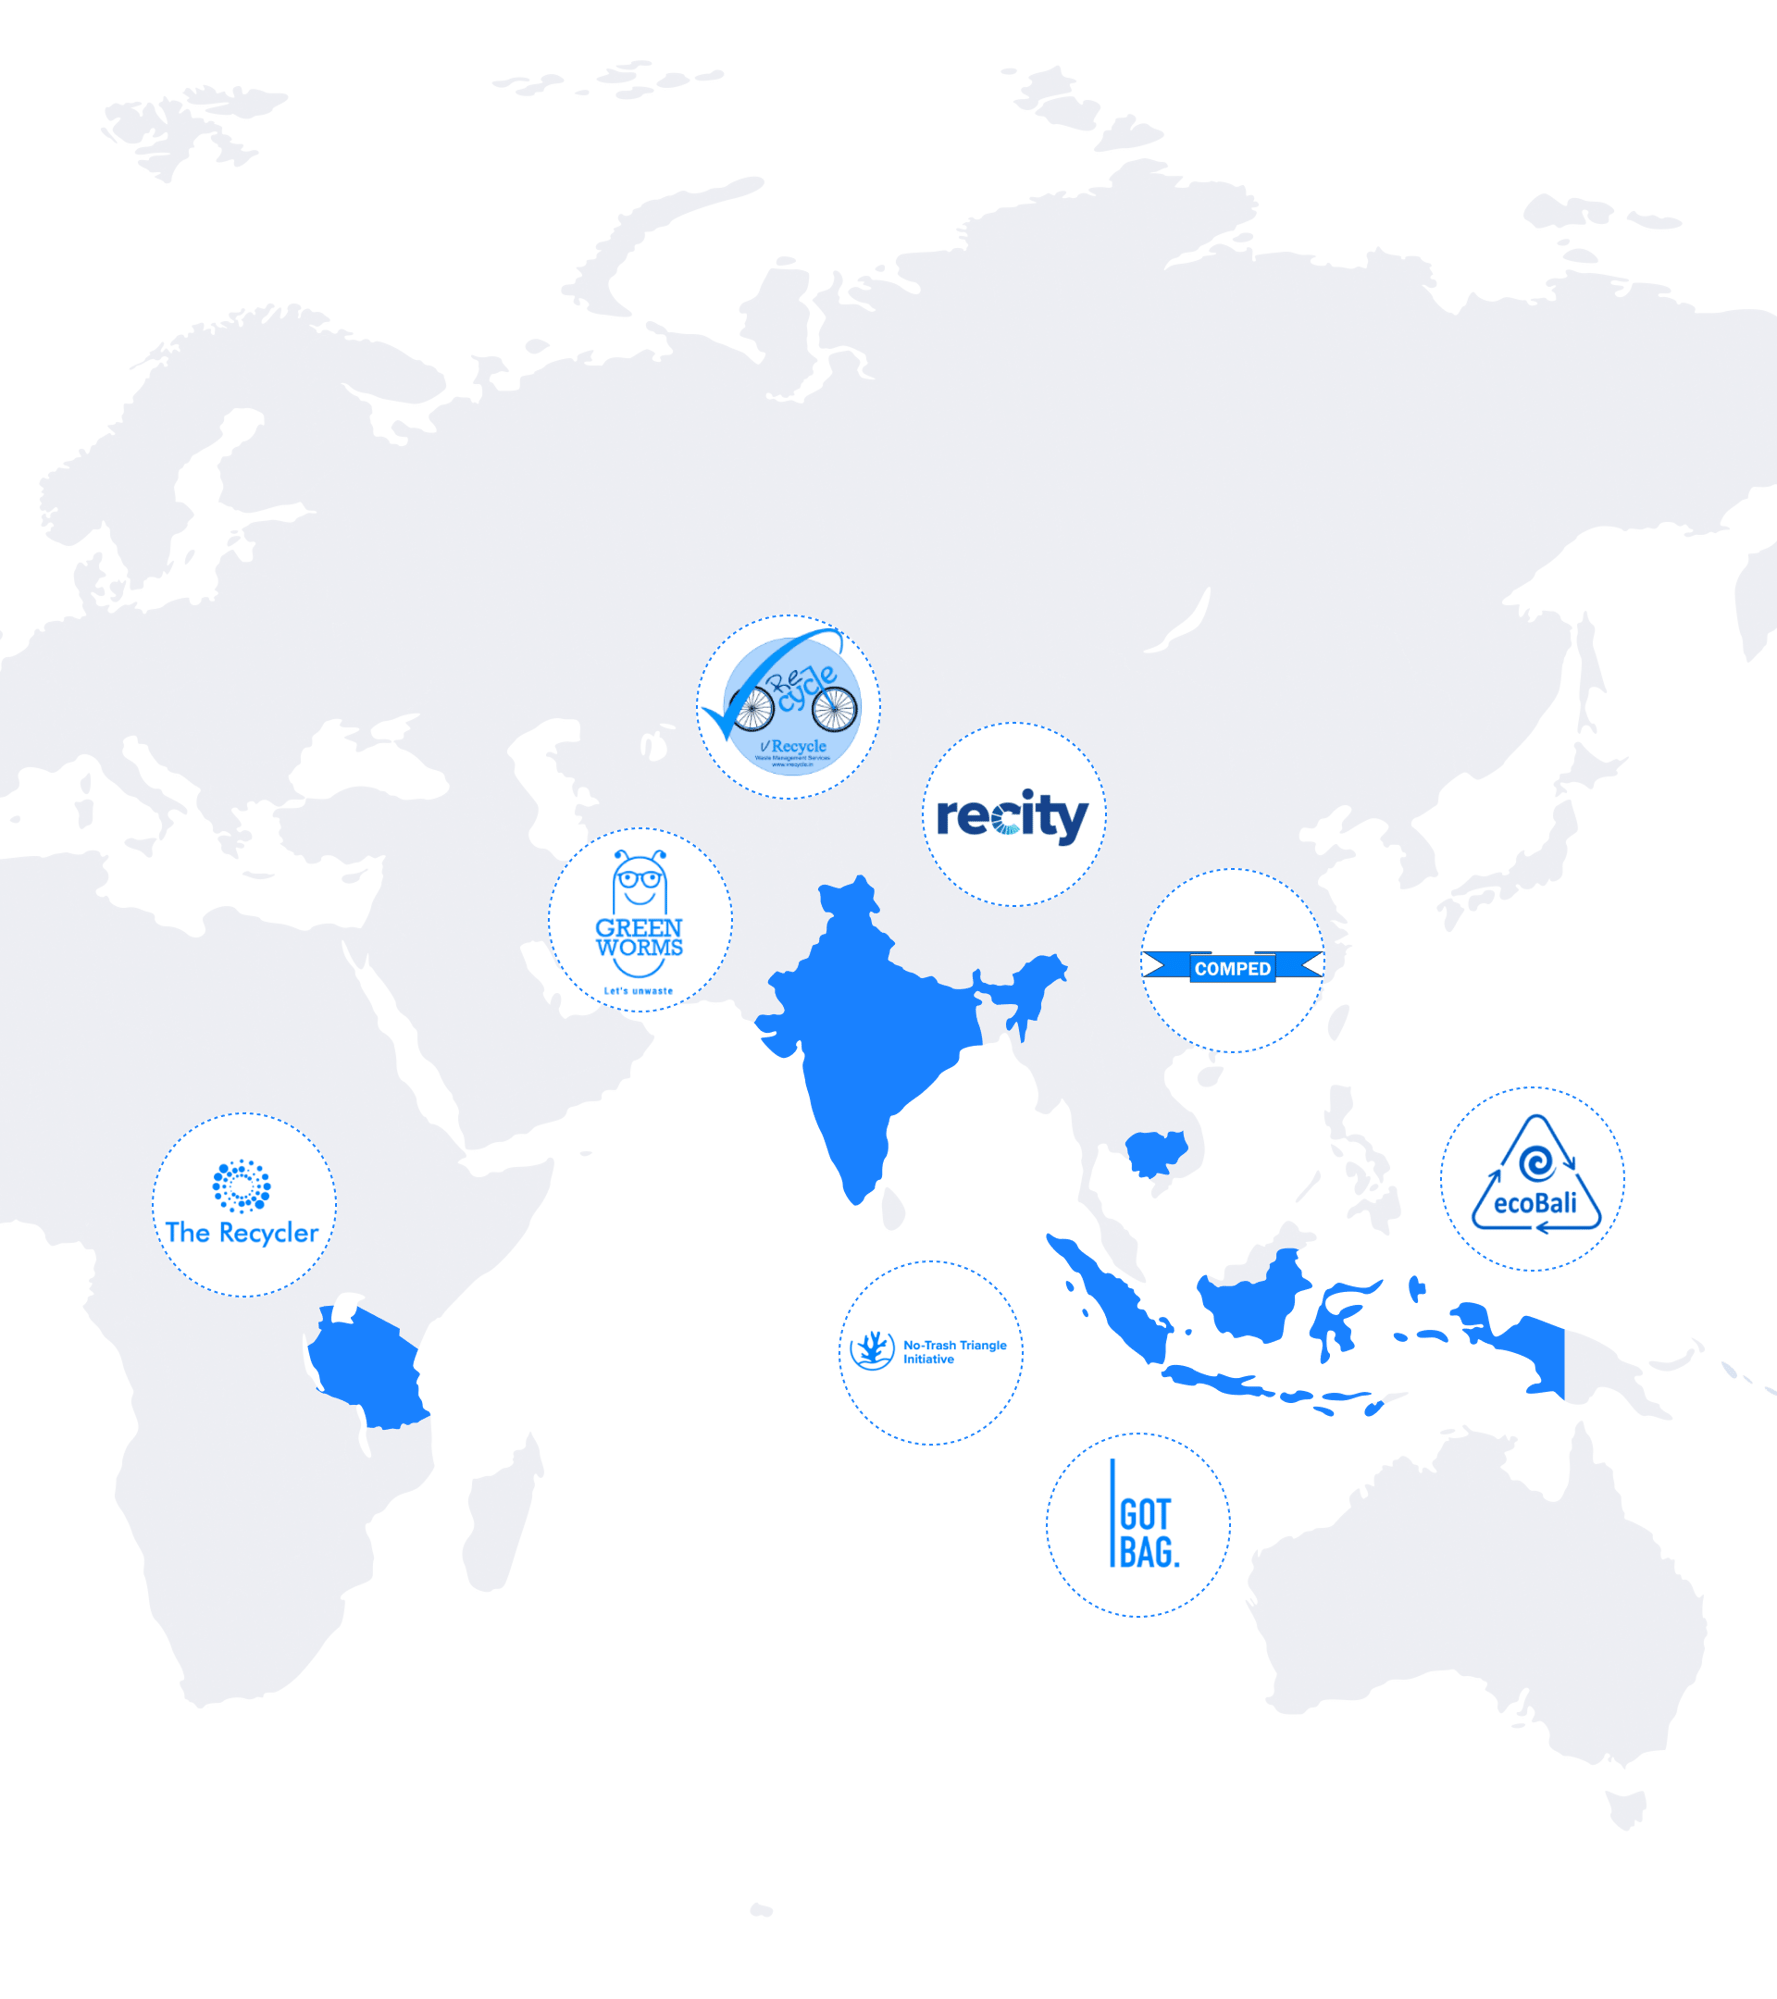 Image shows a map of coastal regions in India, Indonesia and Africa where CleanHub's Collection Partners are located and recovering waste 